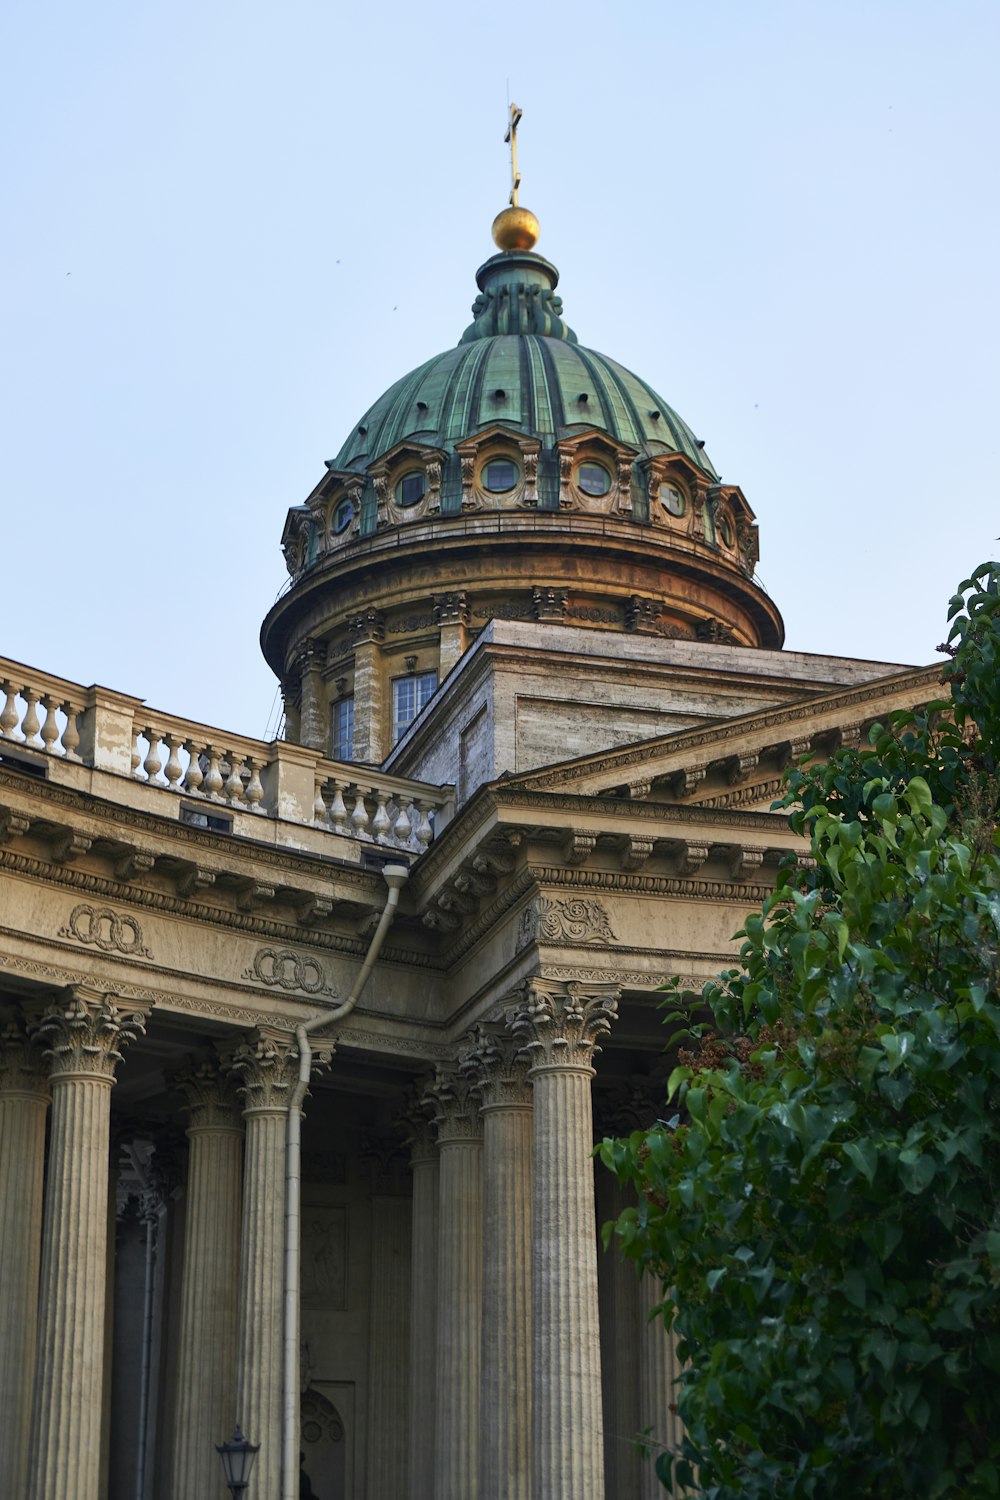 a building with columns and a dome on top